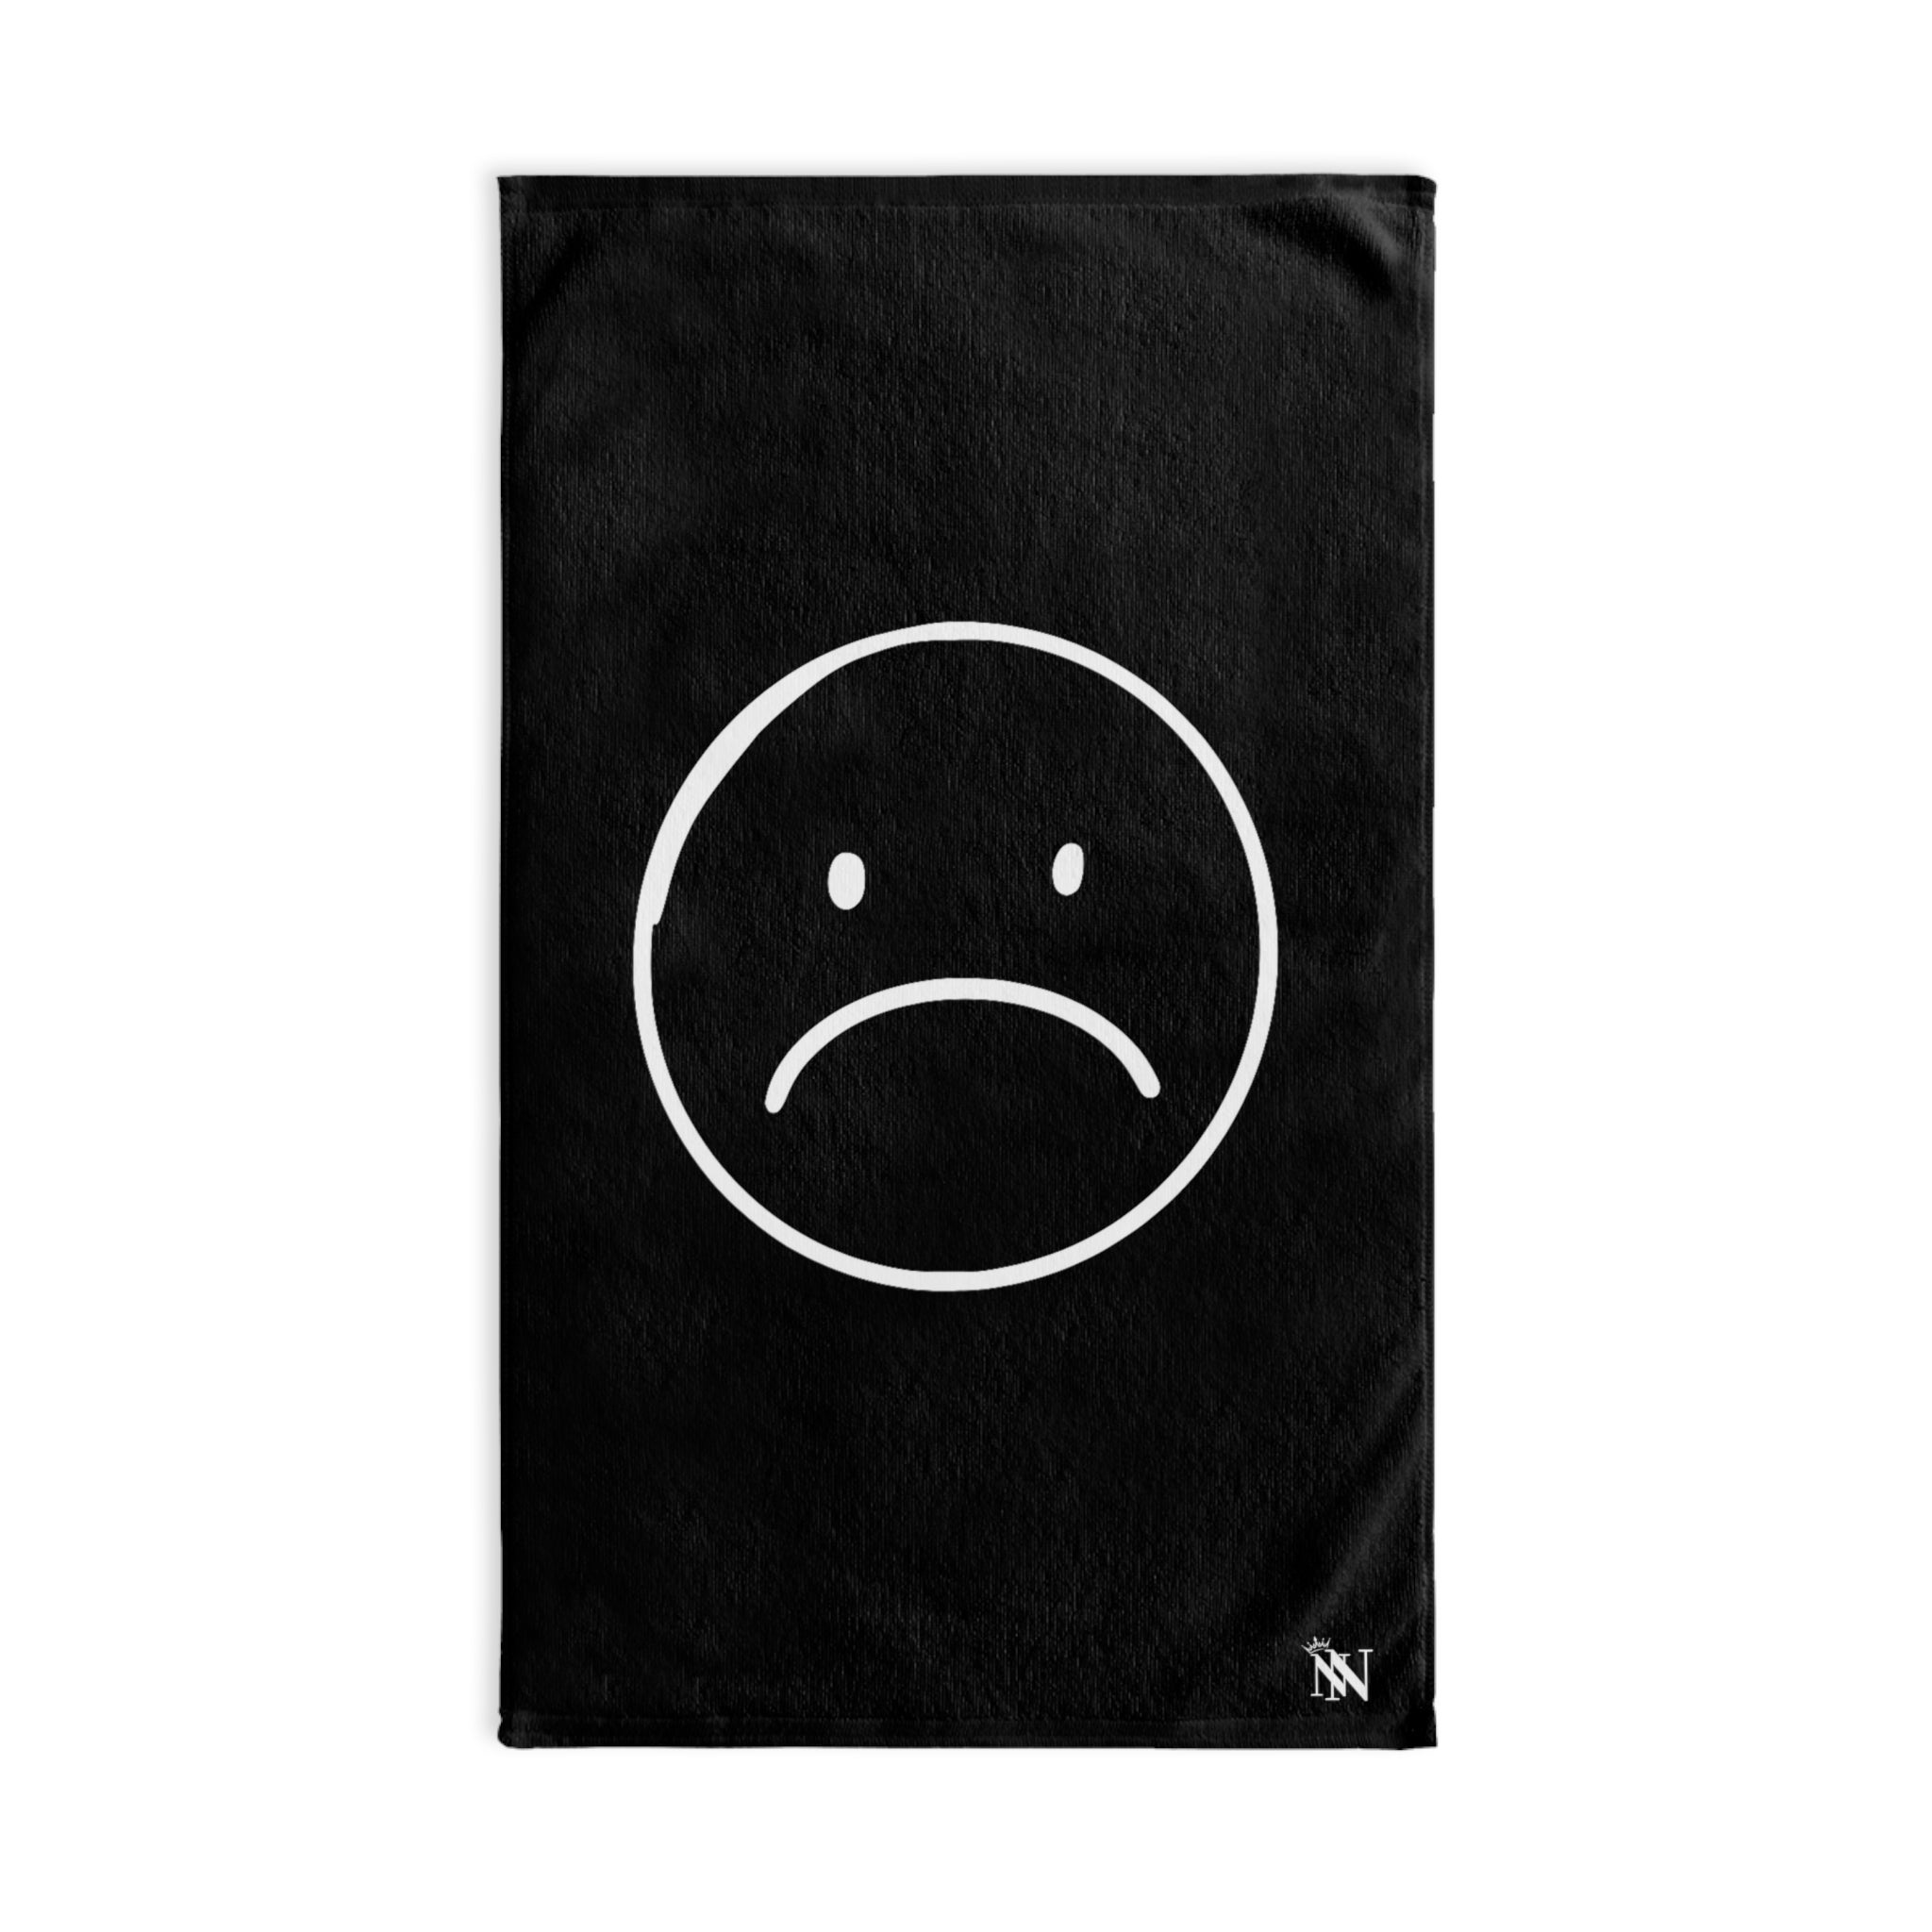 Sad Frown WhiteBlack | Sexy Gifts for Boyfriend, Funny Towel Romantic Gift for Wedding Couple Fiance First Year 2nd Anniversary Valentines, Party Gag Gifts, Joke Humor Cloth for Husband Men BF NECTAR NAPKINS